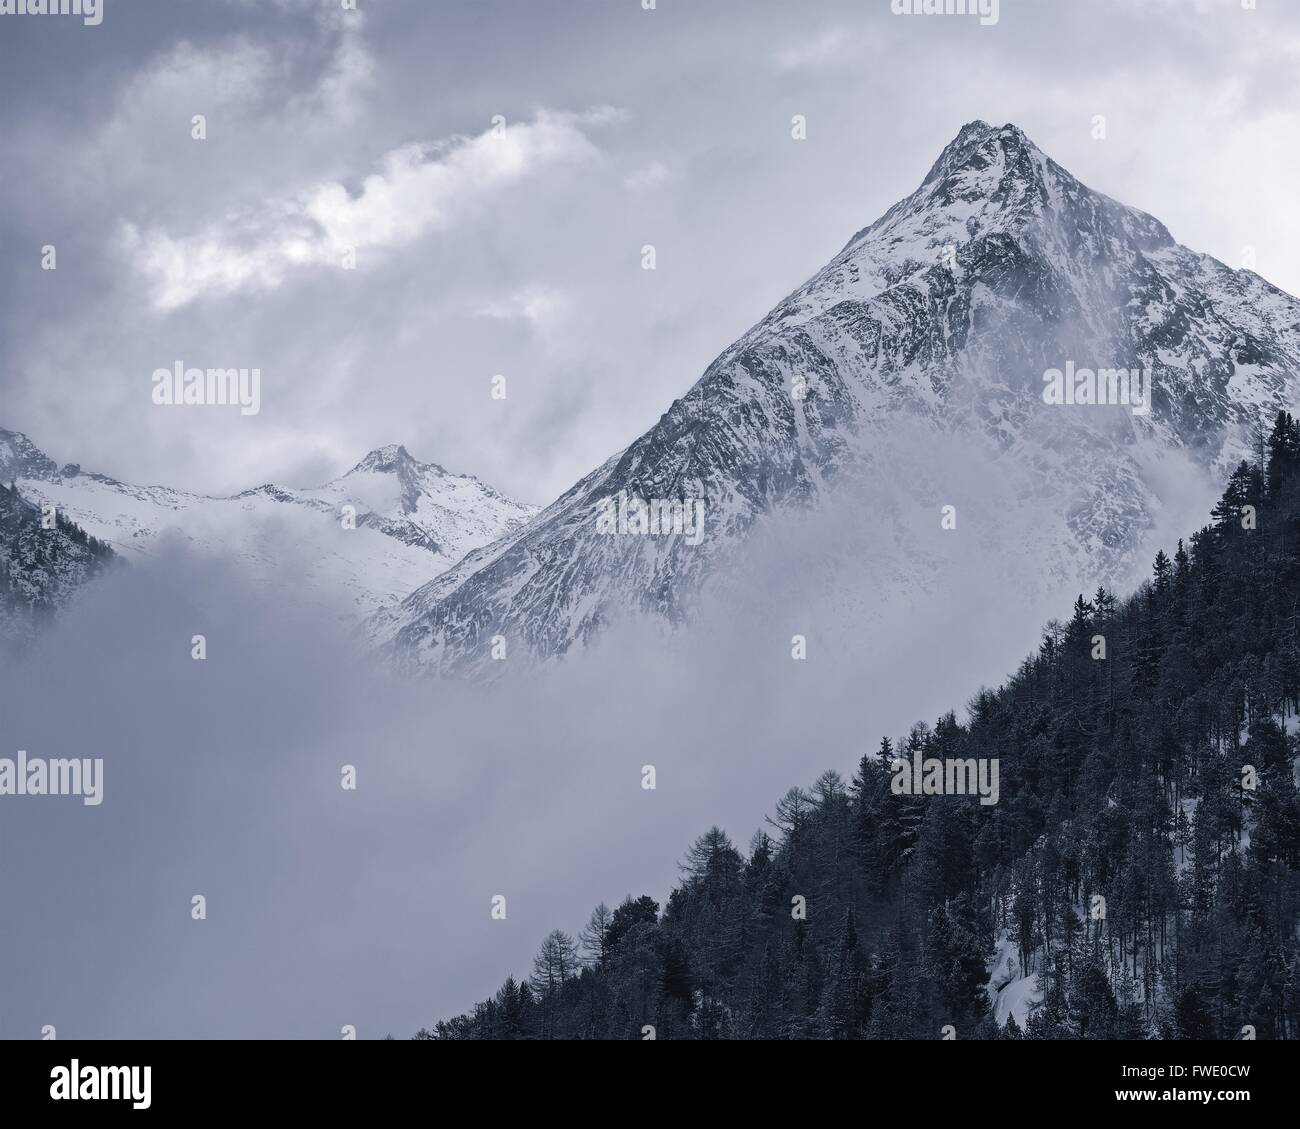 A B&W rendition of the high mountains above the Saas Fee resort in Switzerland on a misty winters day Stock Photo